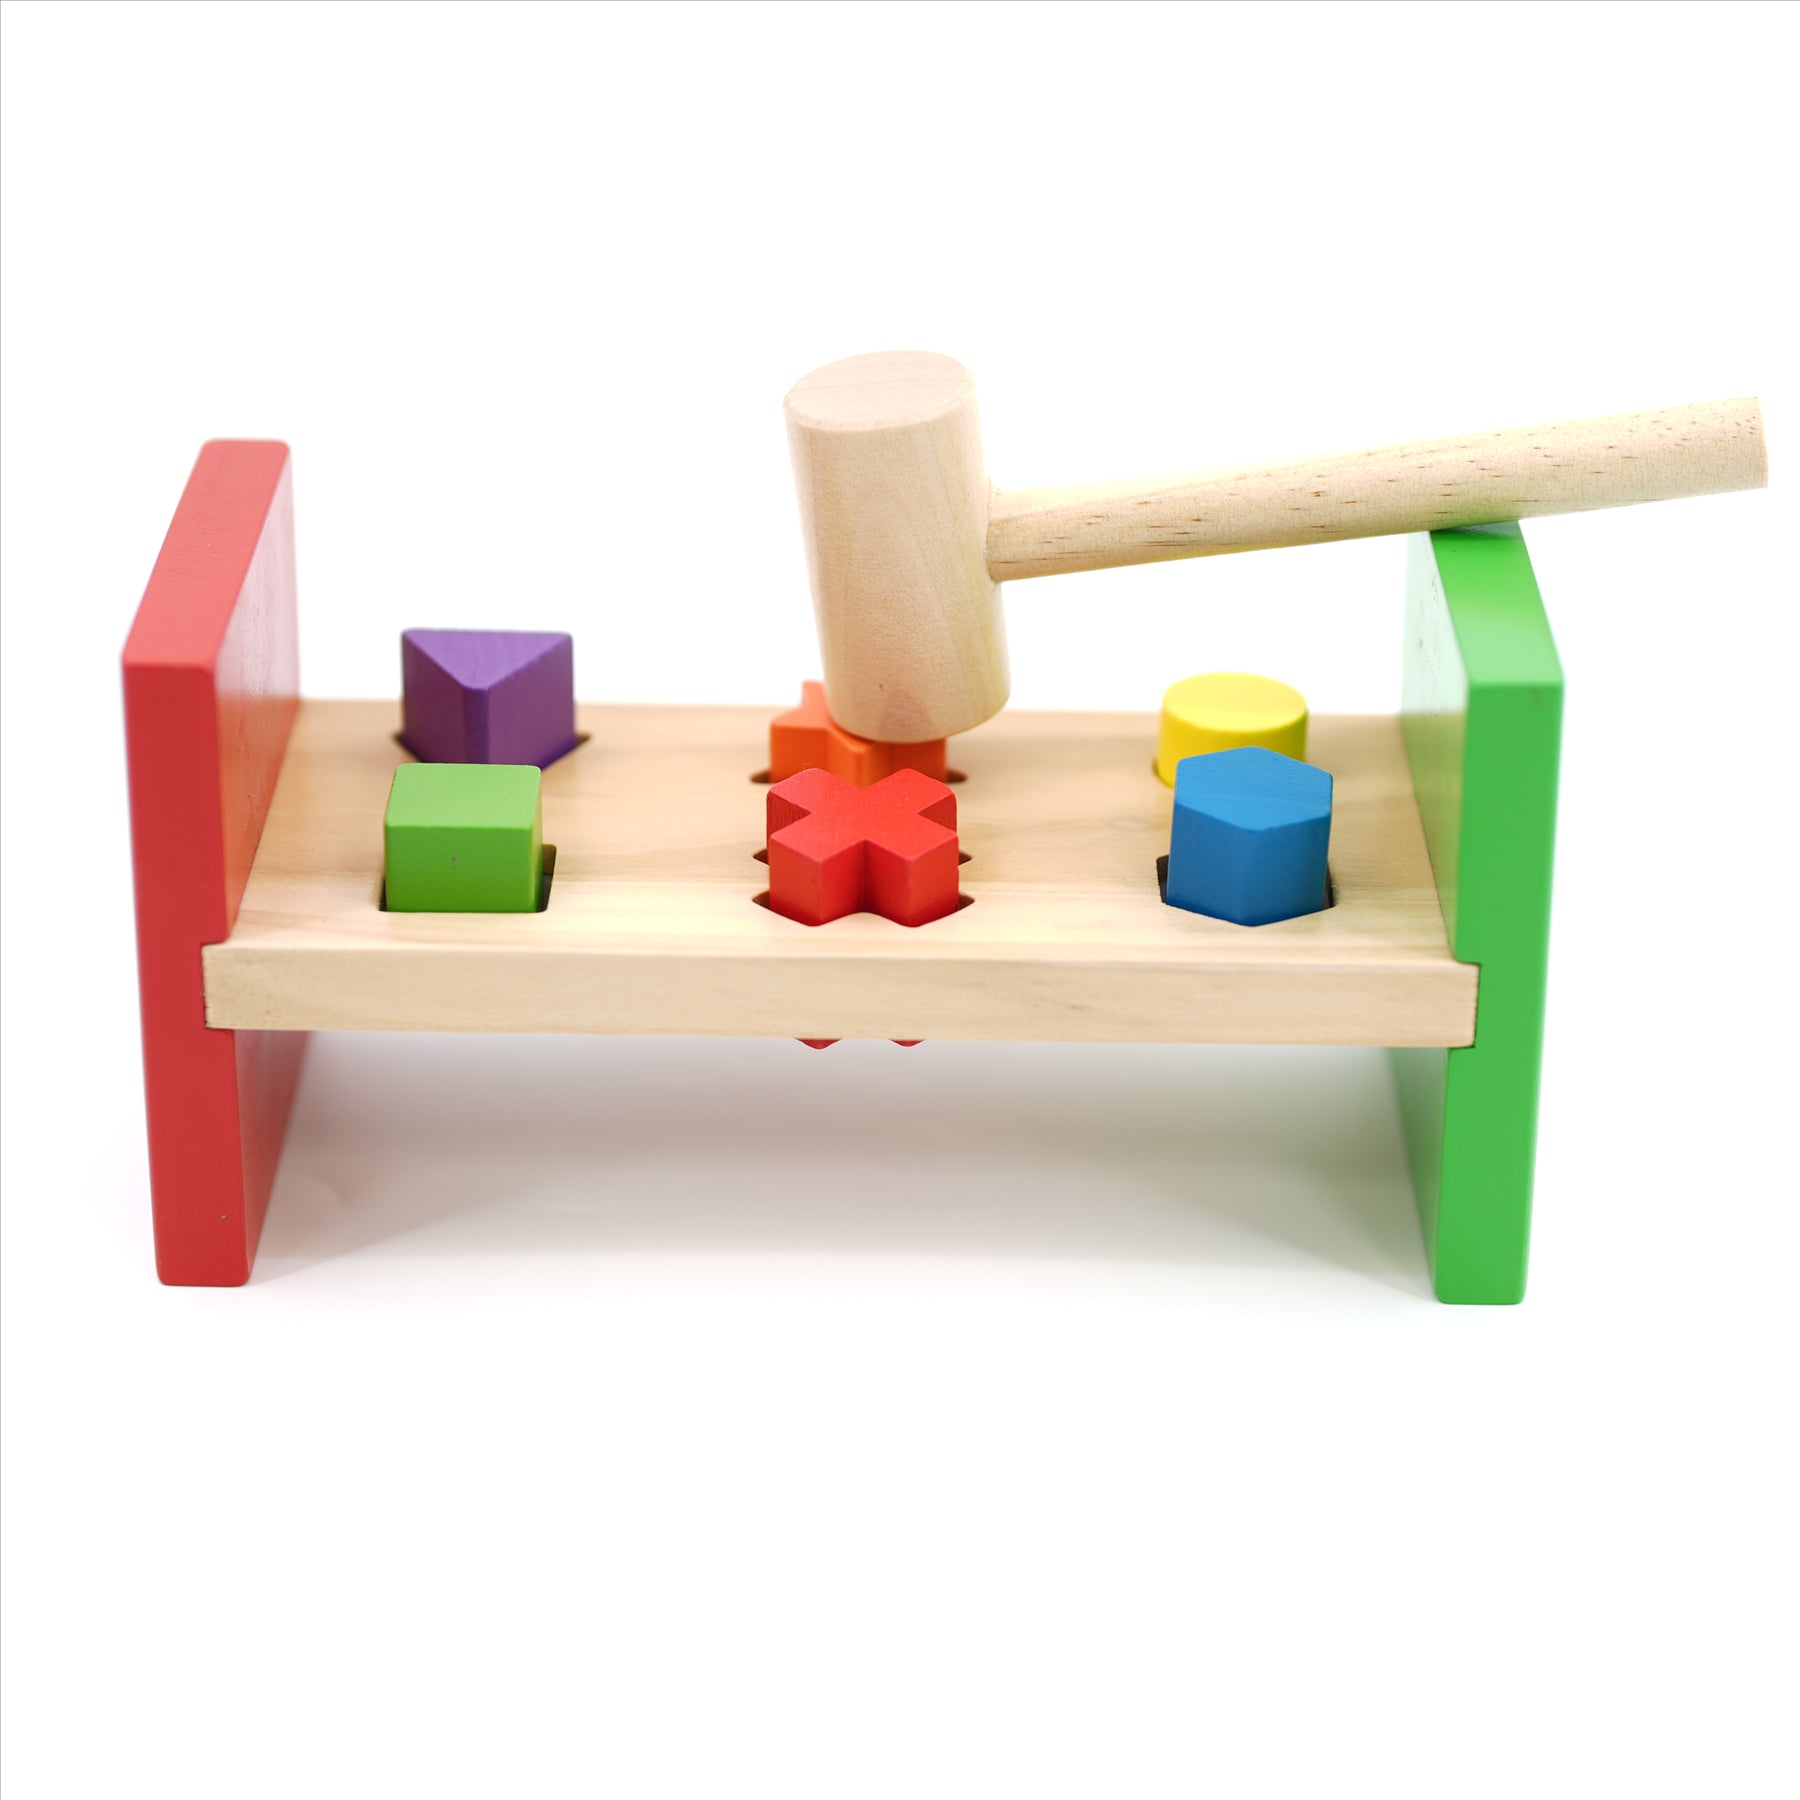 Hammer Pounding Bench Toy by The Magic Toy Shop - The Magic Toy Shop